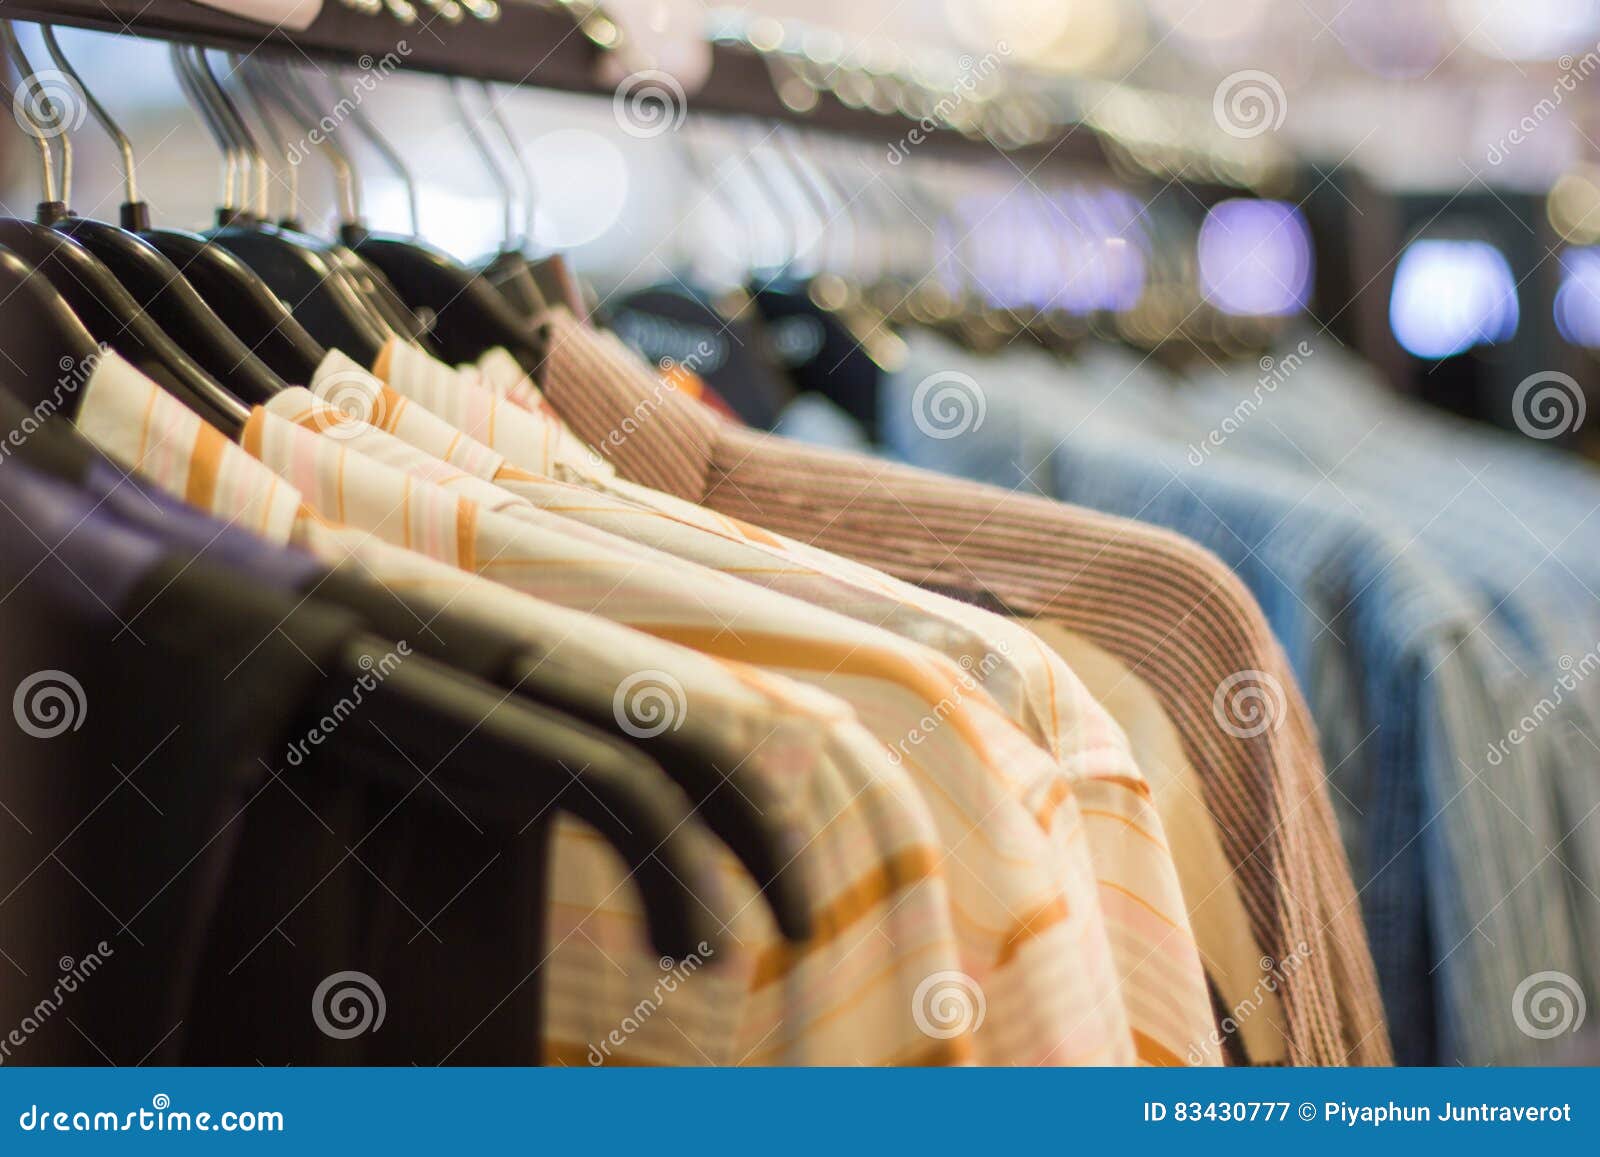 Closeup Woman Clothes on a Hanger in Clothes Shop Stock Image - Image ...